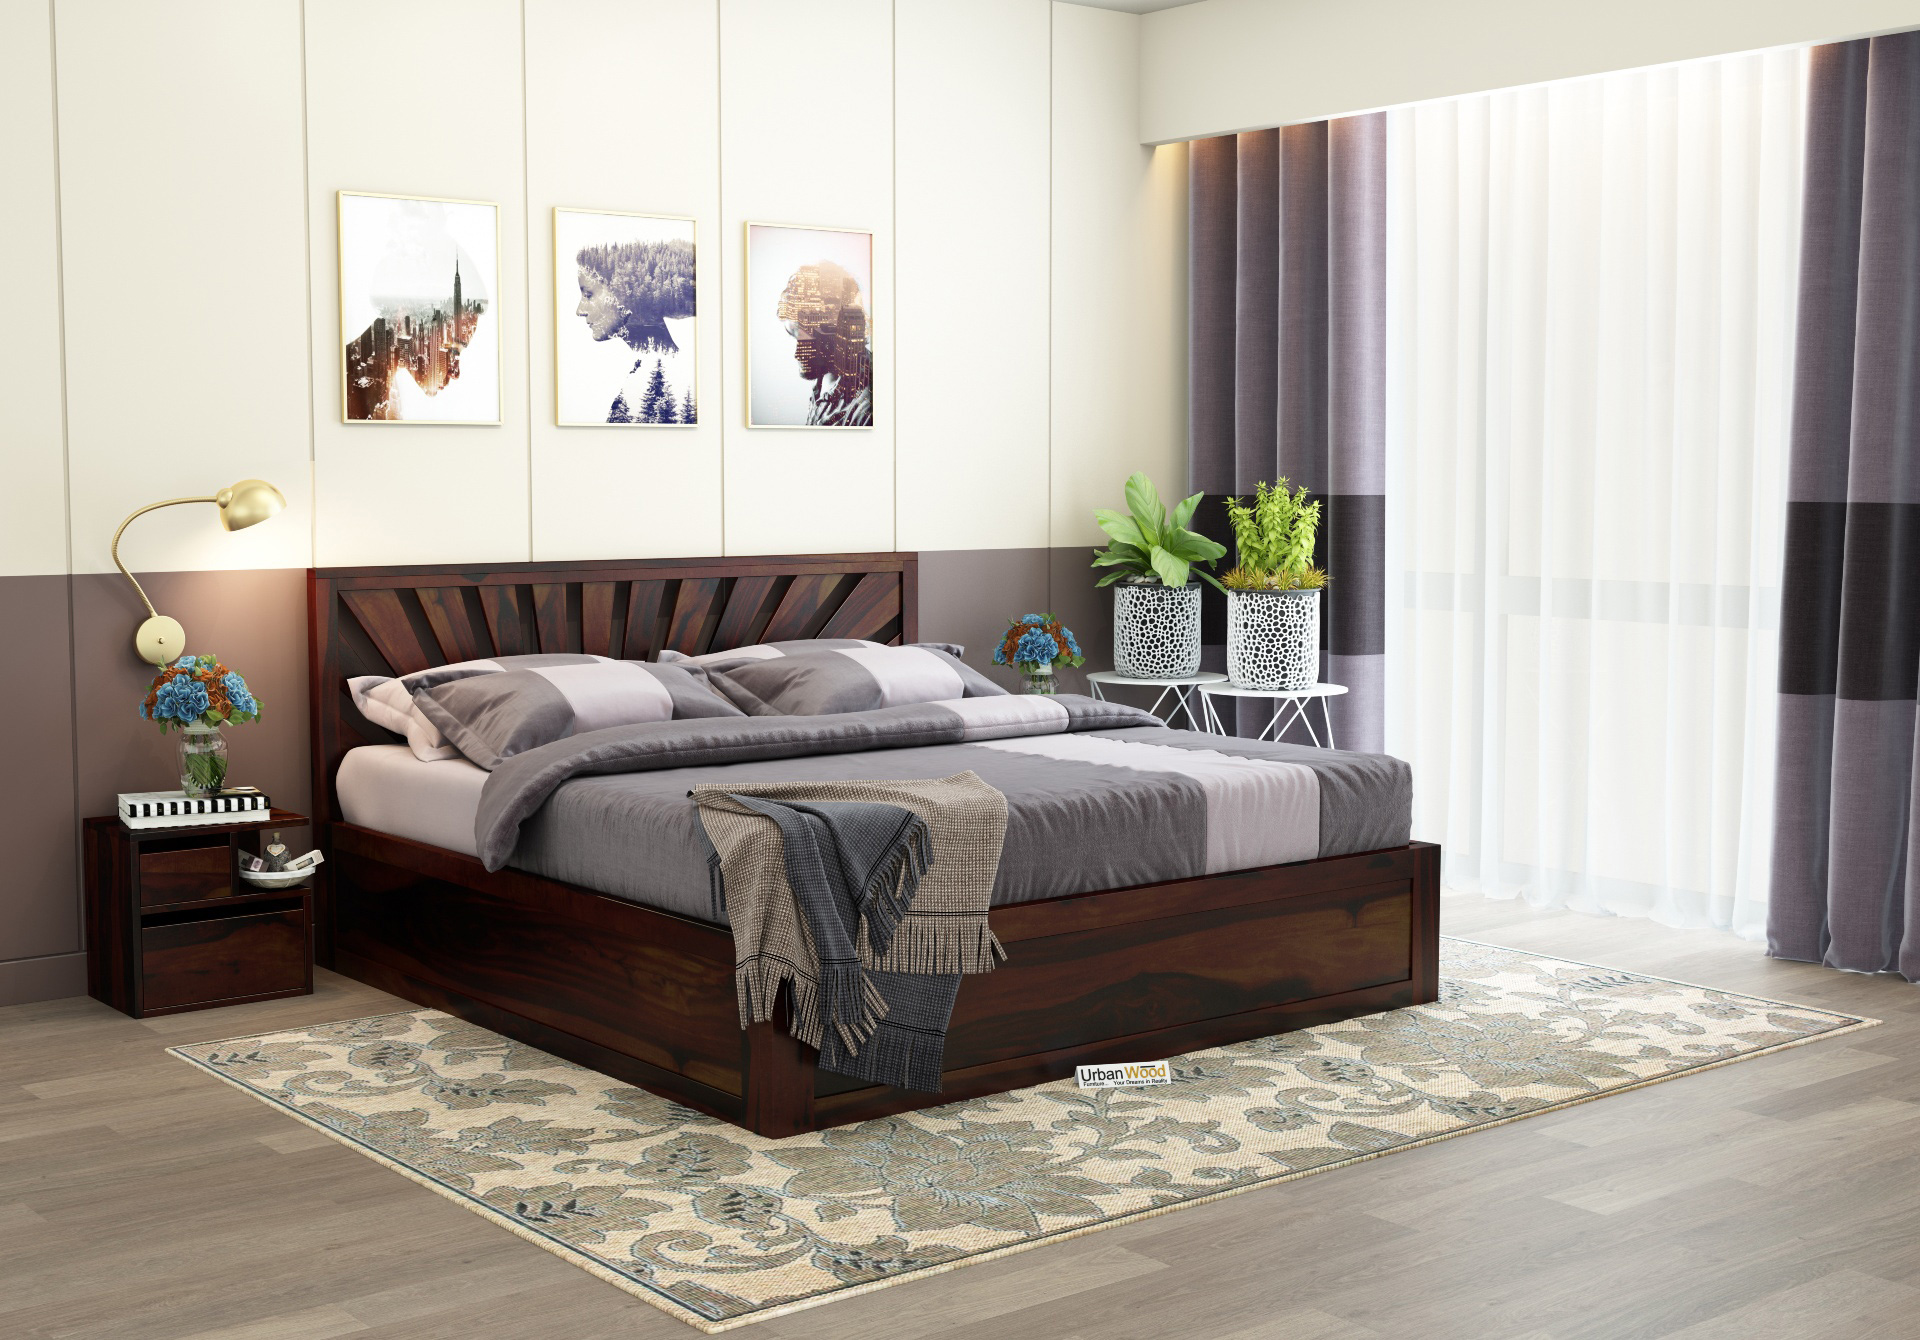 Jerry Wooden Bed With Box Storage King Size ( Walnut Finish )